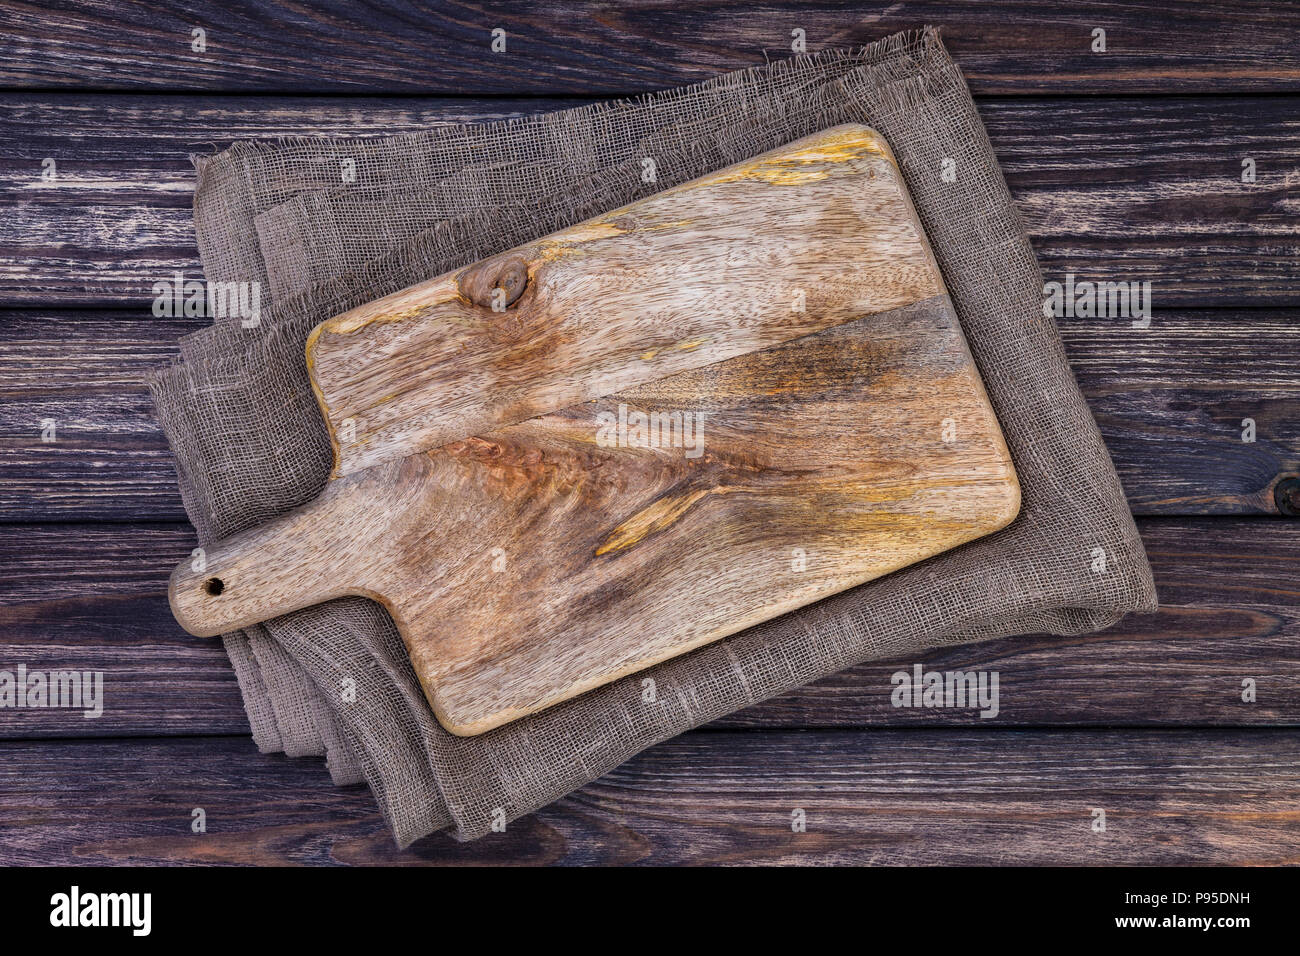 https://c8.alamy.com/comp/P95DNH/old-cutting-board-on-dark-wooden-table-top-view-copy-space-P95DNH.jpg